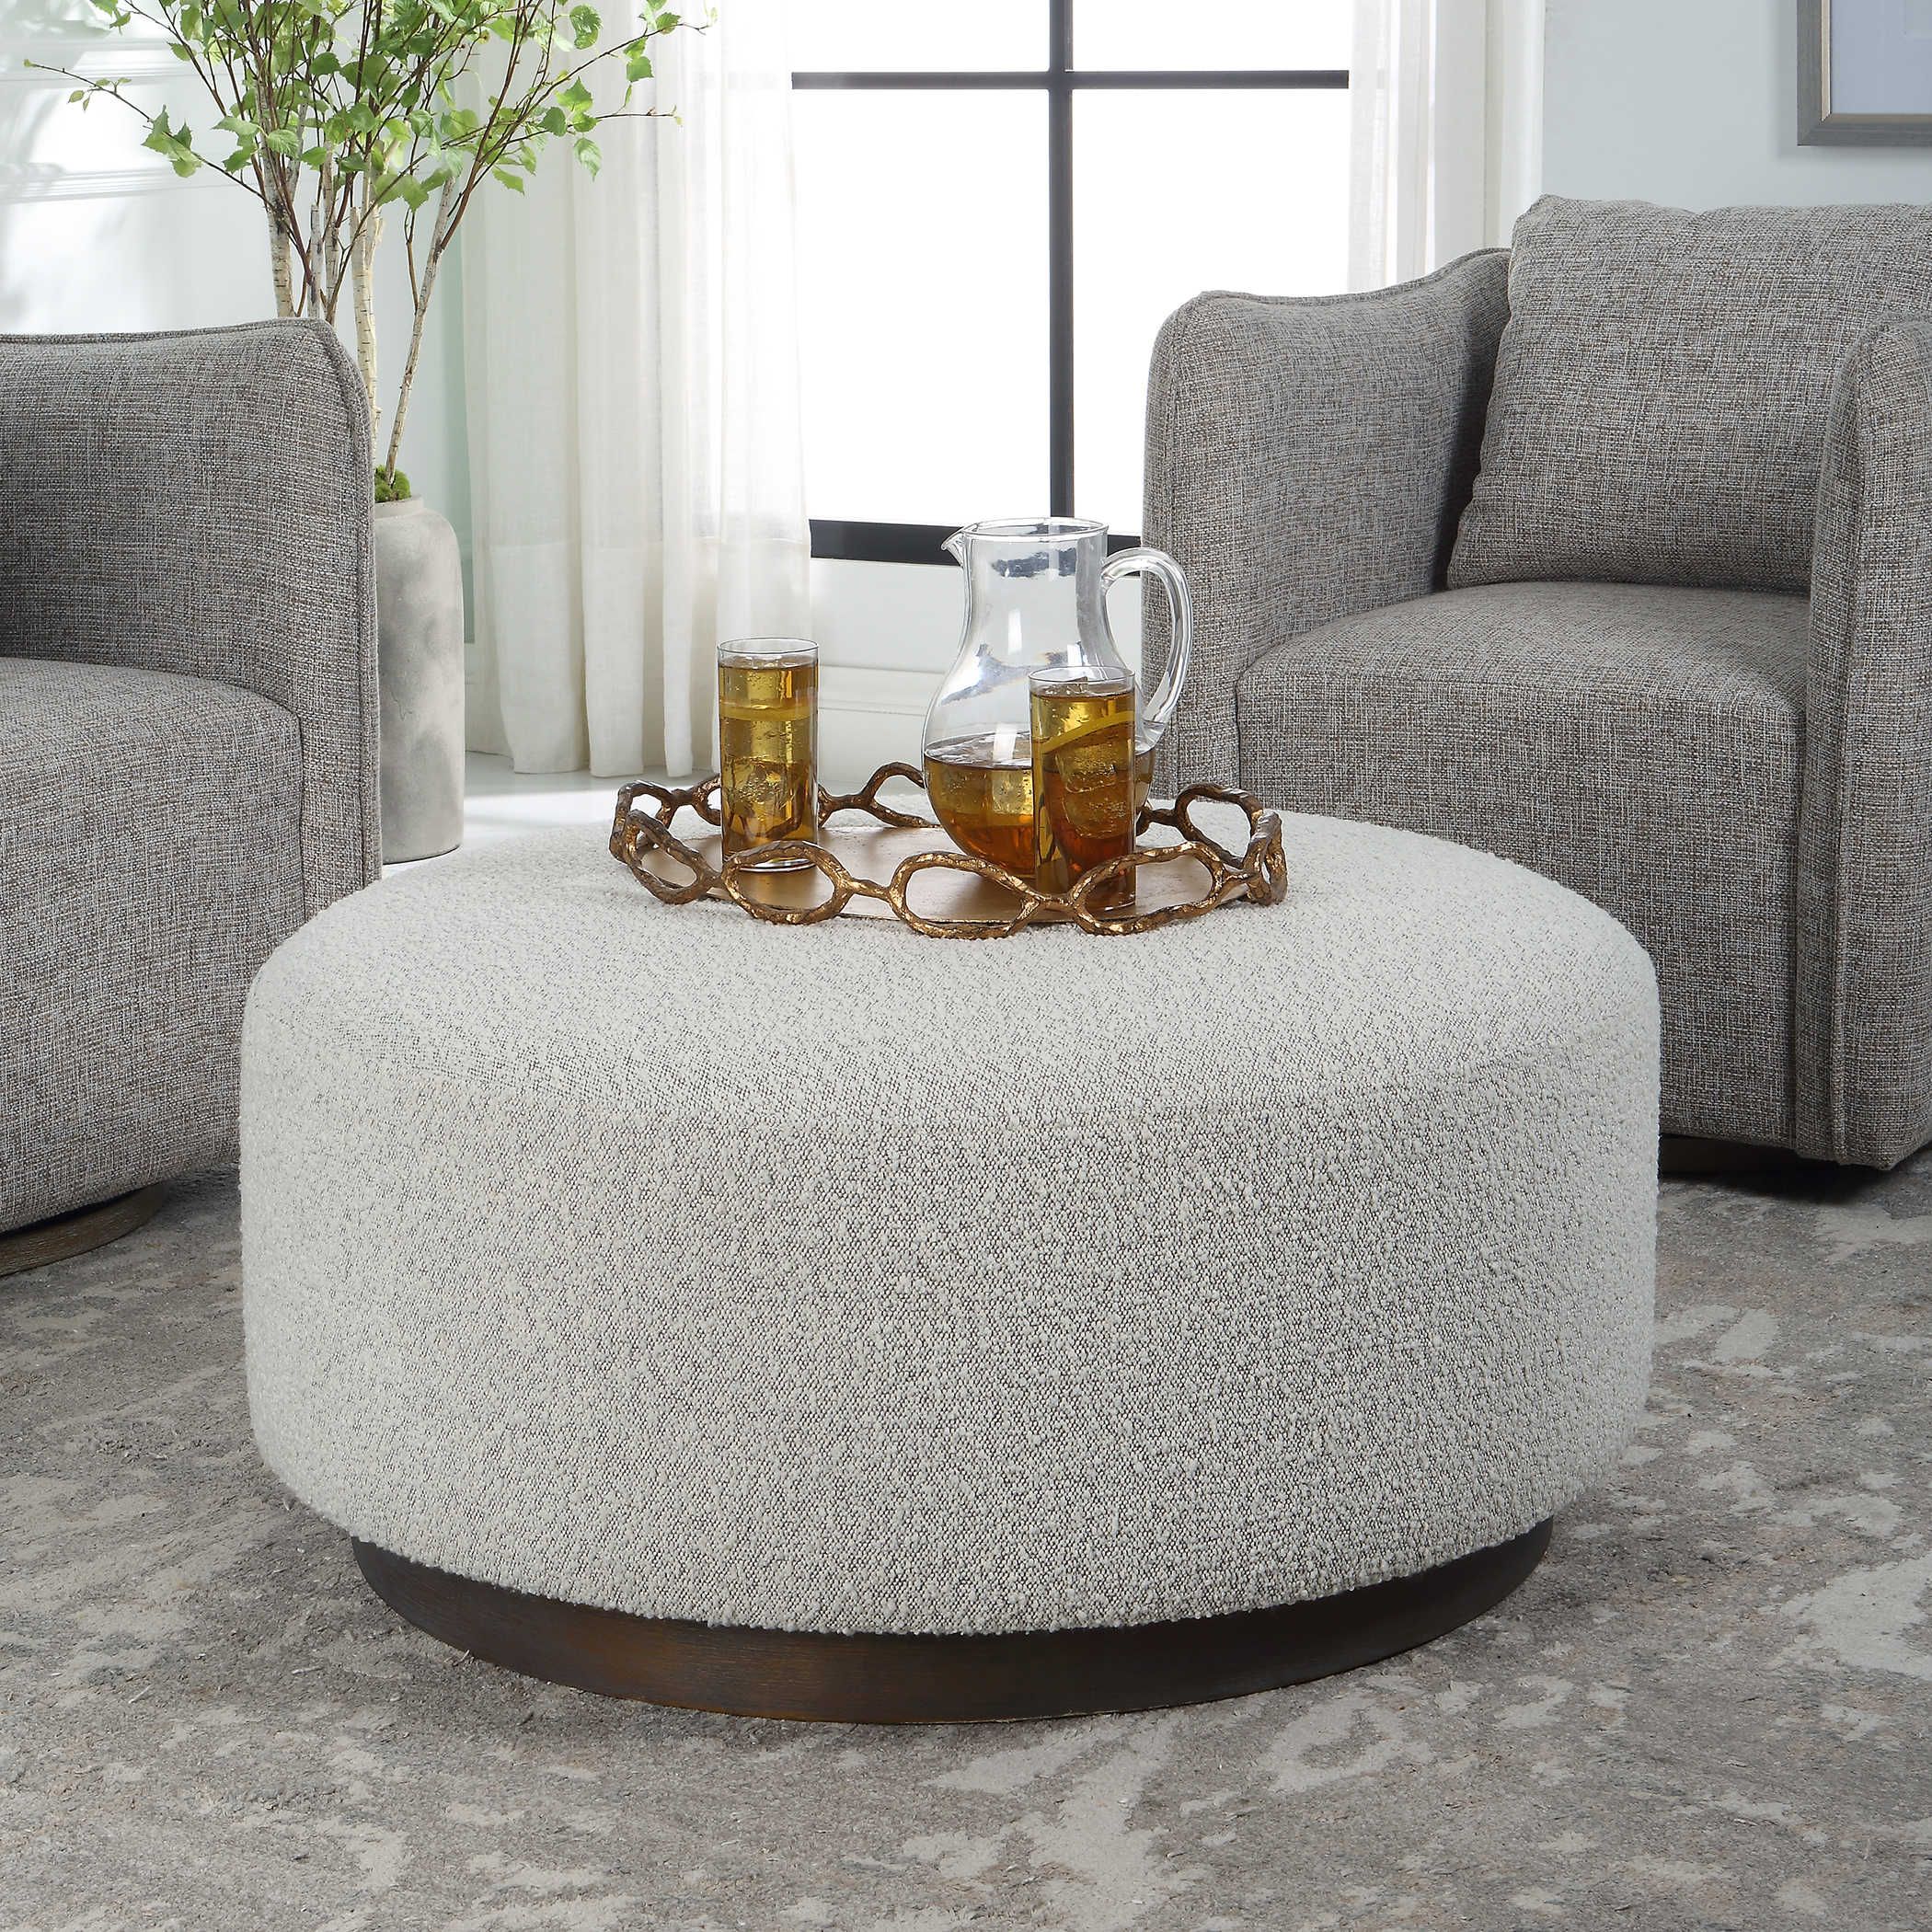 Avila Ottoman, Large, Gray | Uttermost Within Geometric Gray Ottomans (View 14 of 15)